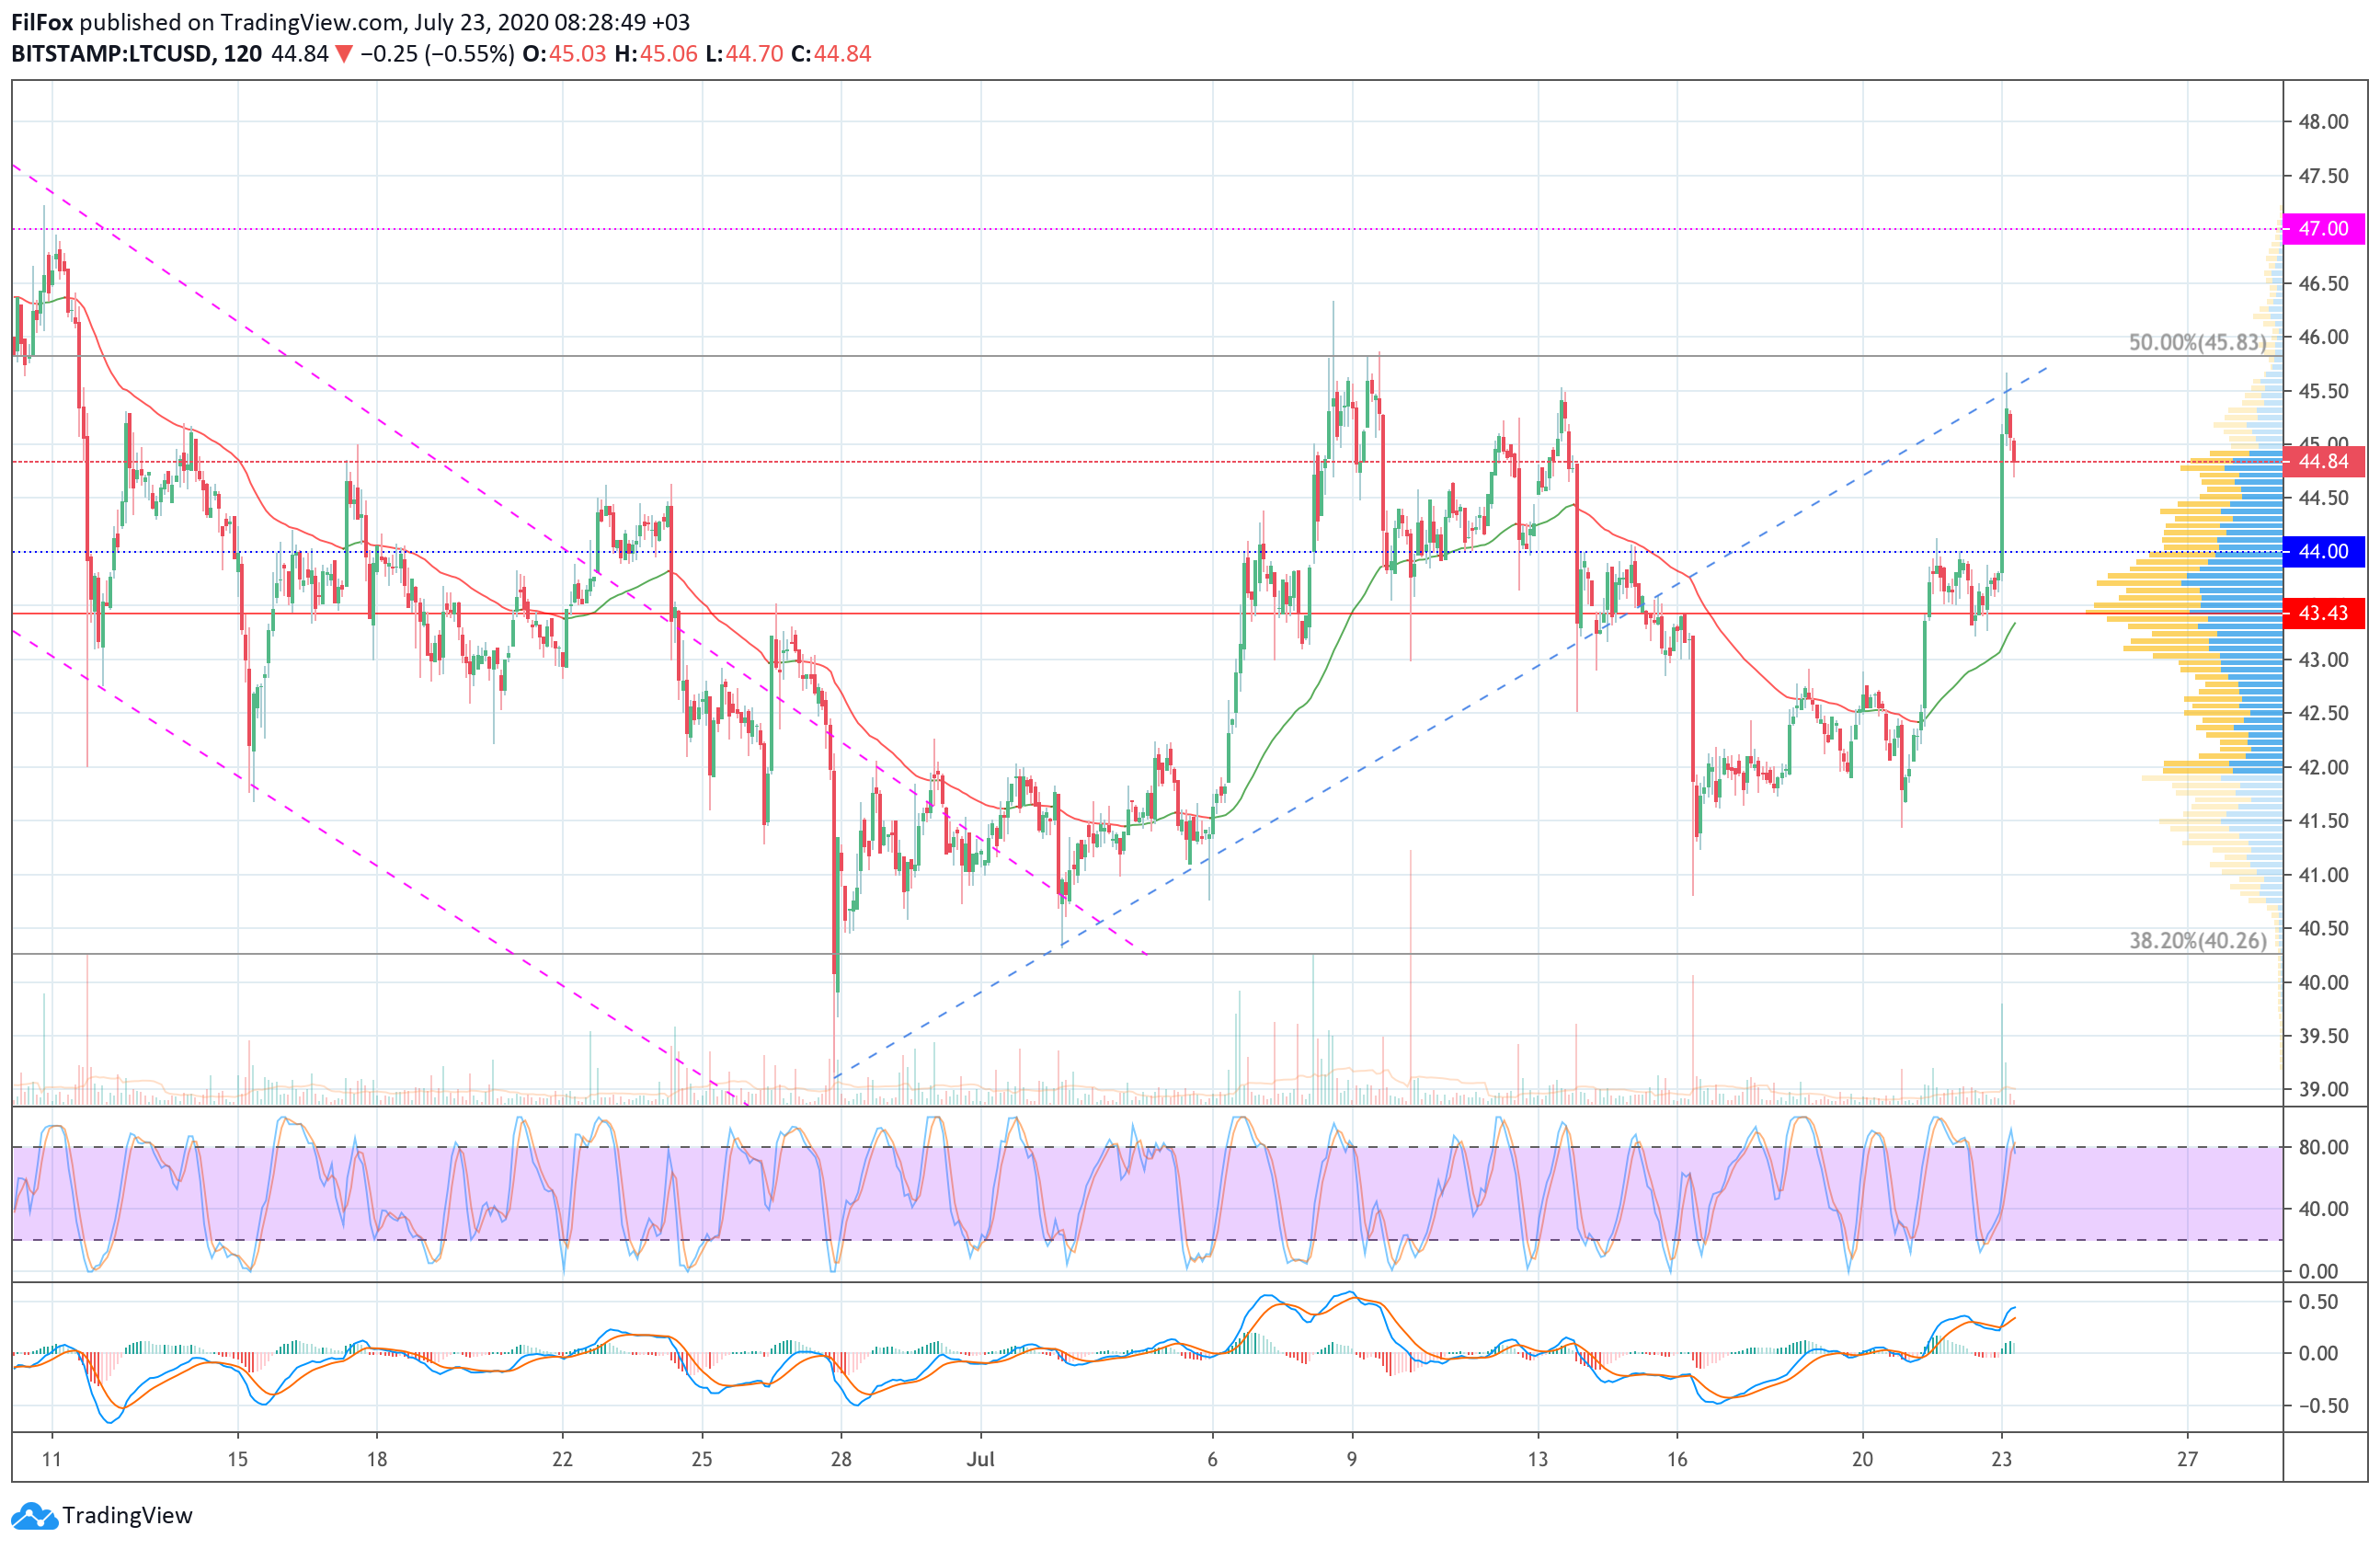 Analysis of the prices of Bitcoin Cash, Cardano, Litecoin, EOS and Stellar for 07/23/2020